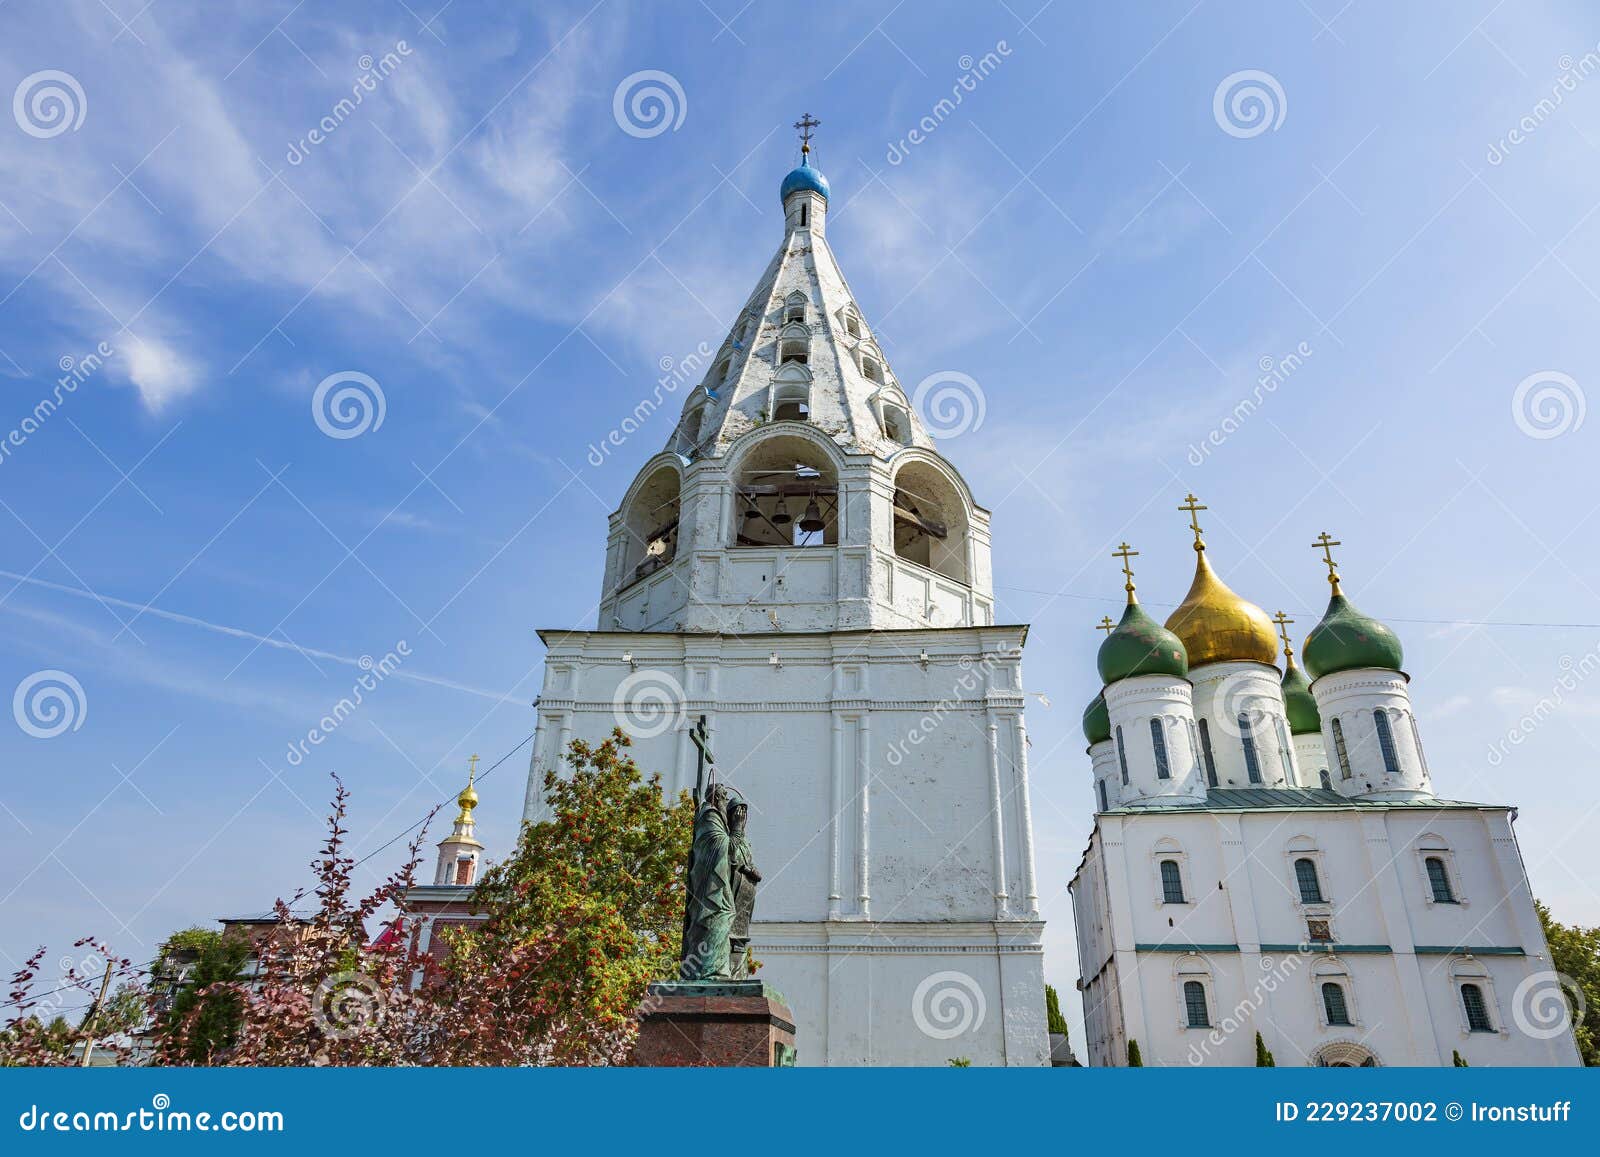 Beautiful Bell Tower Of The Assumption Cathedral In Kolomna Russia